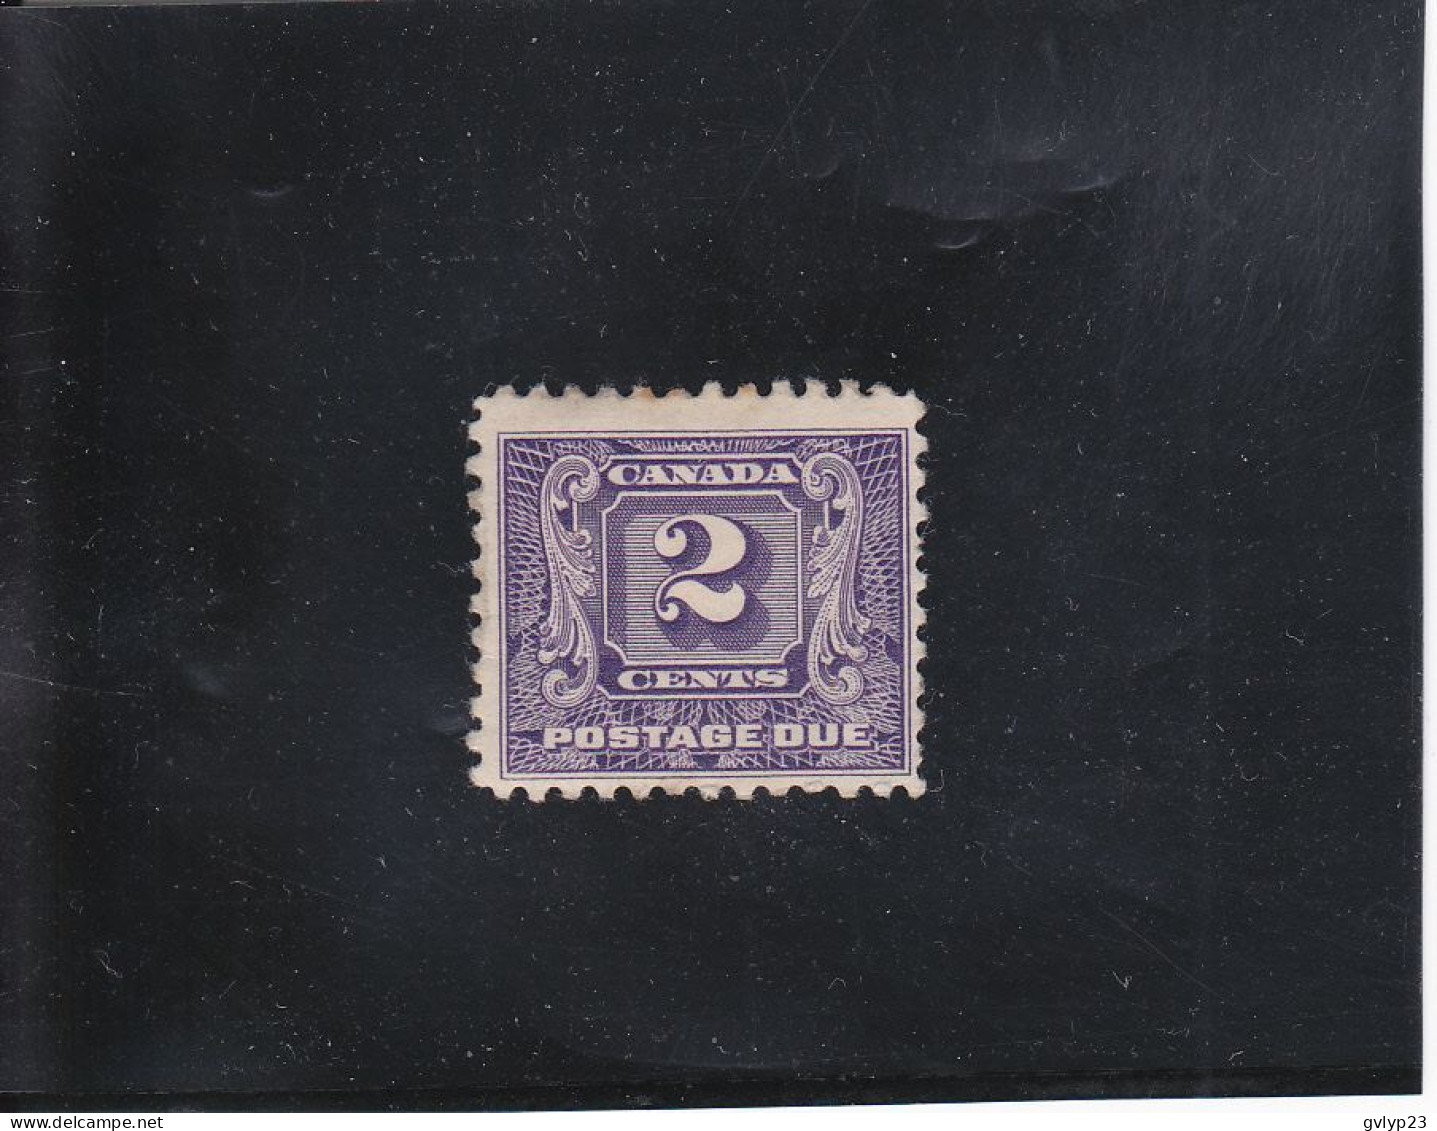 TIMBRES-TAXE 2C VIOLET  NEUF *  N°7  YVERT ET  TELLIER  1930-32 - Postage Due